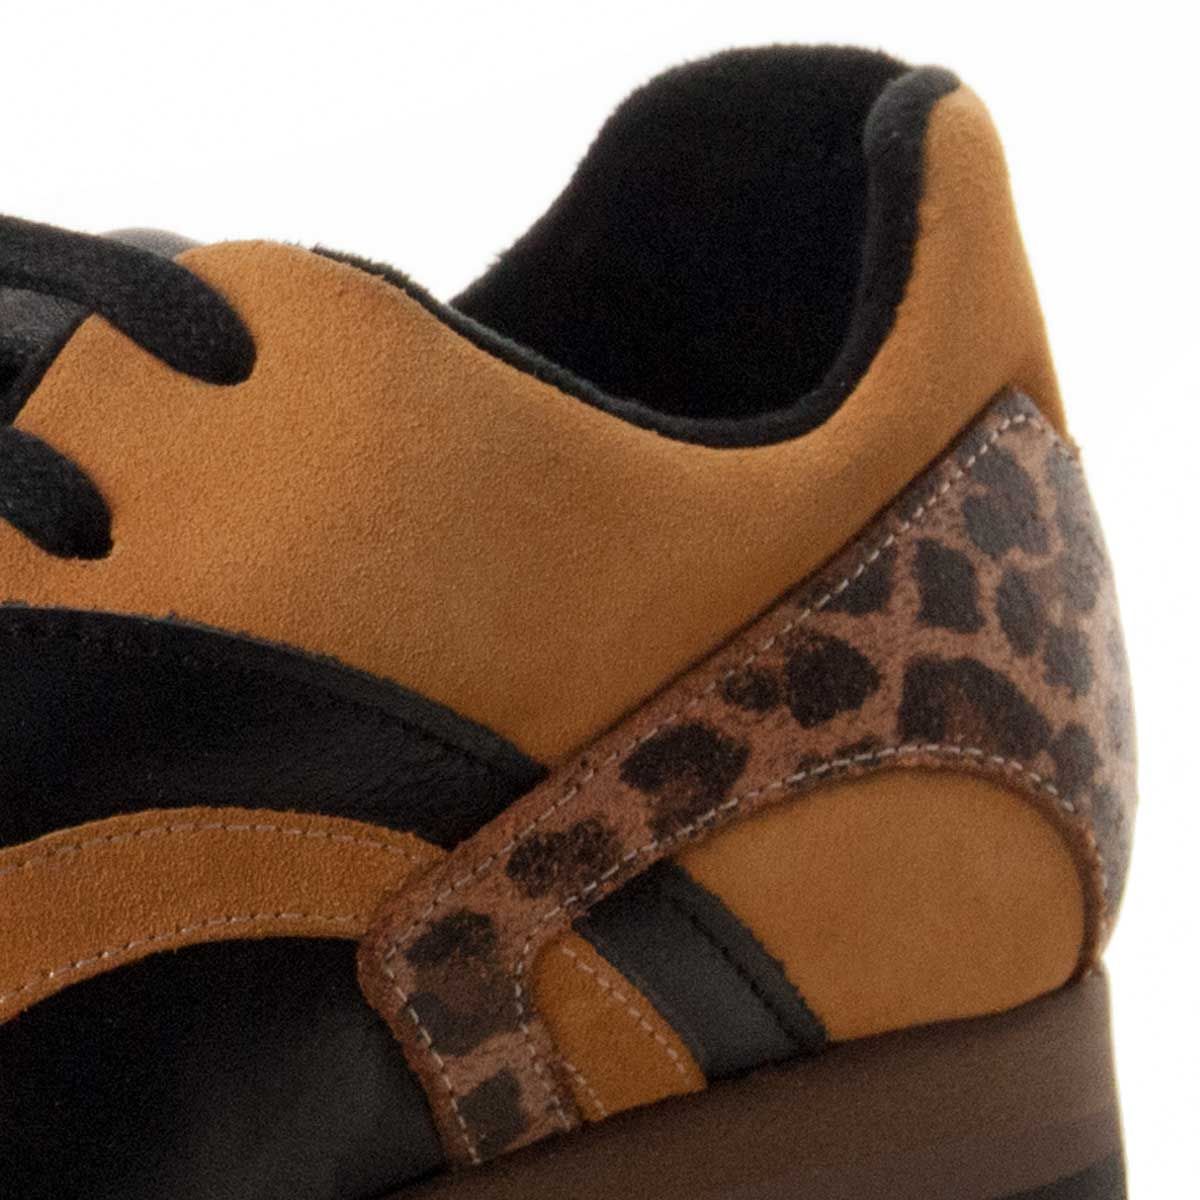 Skener with fine-haired lined interior, and non-slip sole. Skener very comfortable, and very current for its finishes and leopard material, ideal for an urban daily style. Manufactured by hand, high quality, with wedge sole and laces. Built with a very durable rubber sole. Made in Spain.